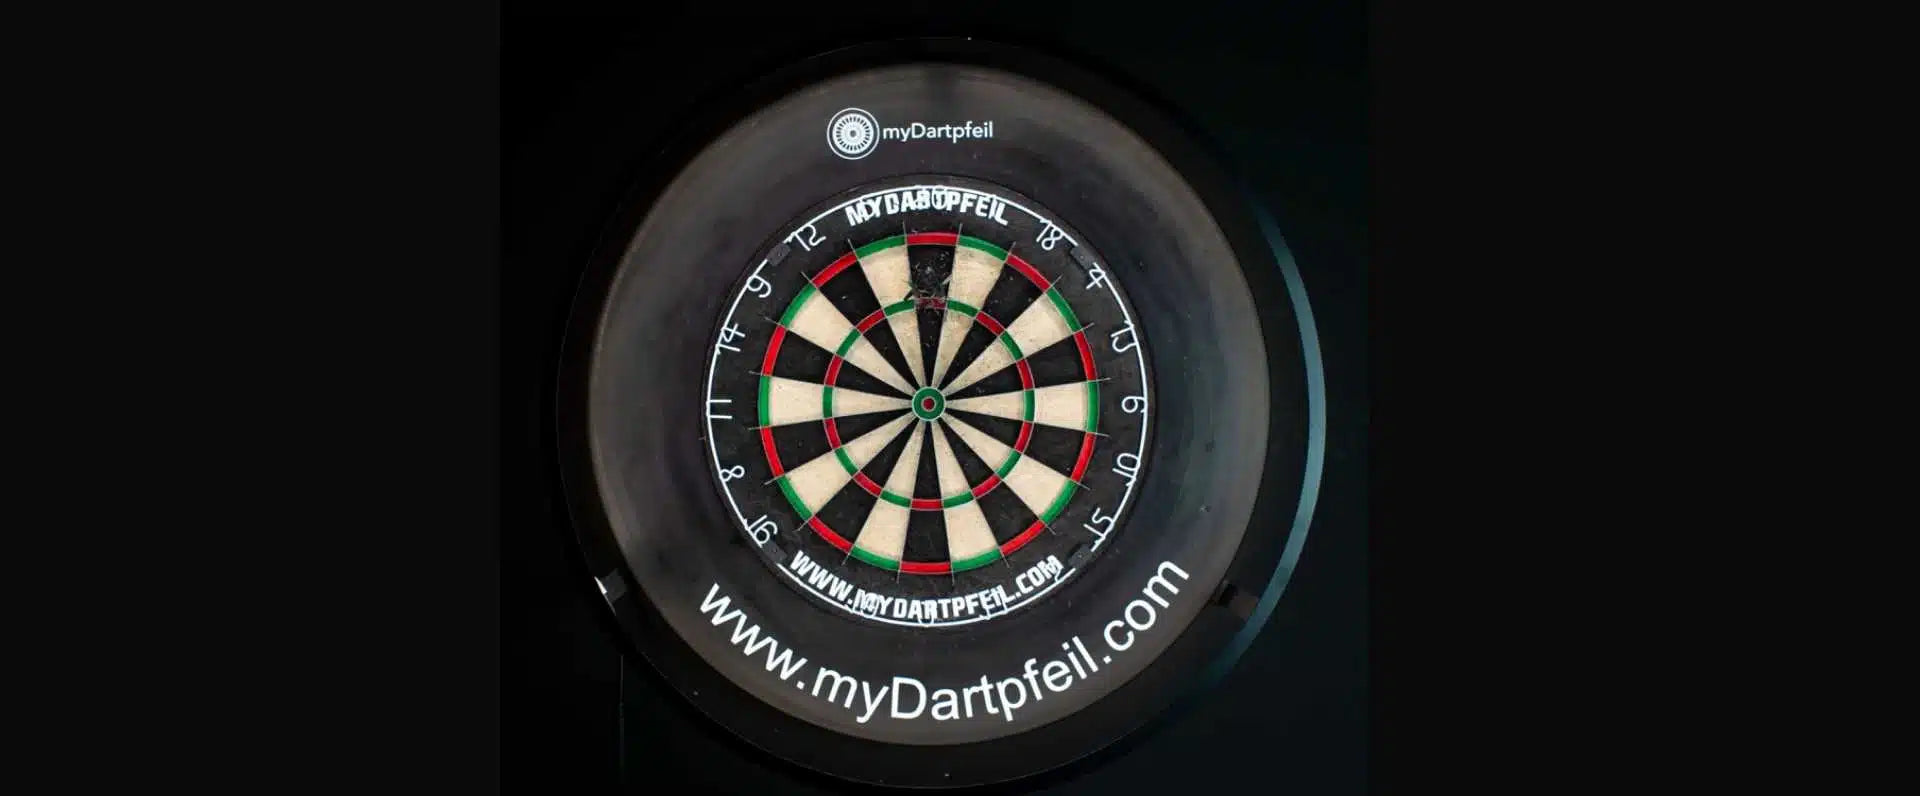 Lighting for the dartboard: guide including DIY tips